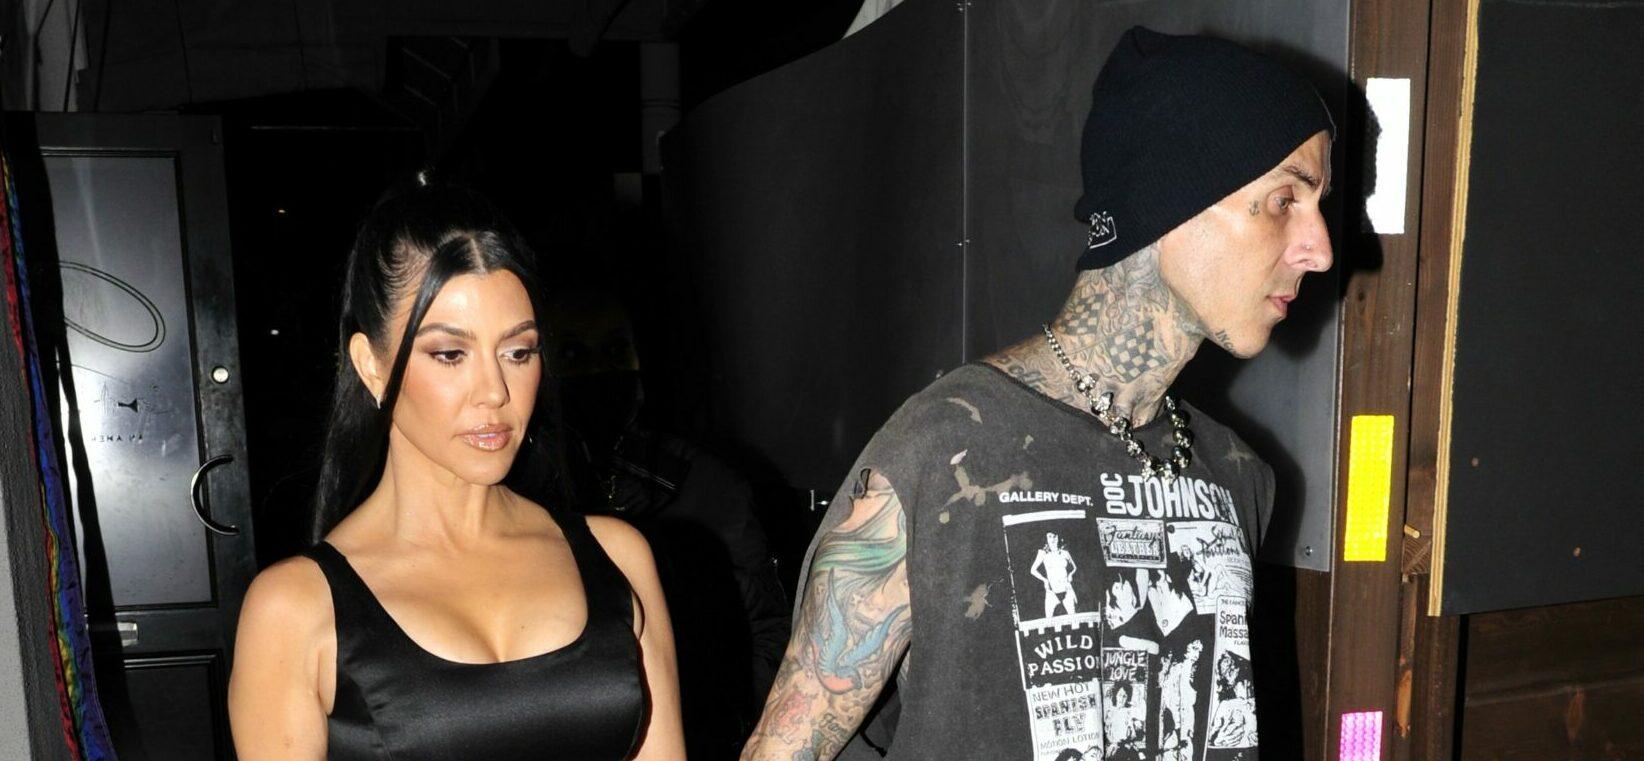 Kourtney Kardashian & Travis Barker Share A Kiss On A Yacht During Romantic Getaway In Italy: ‘That’s Amore’